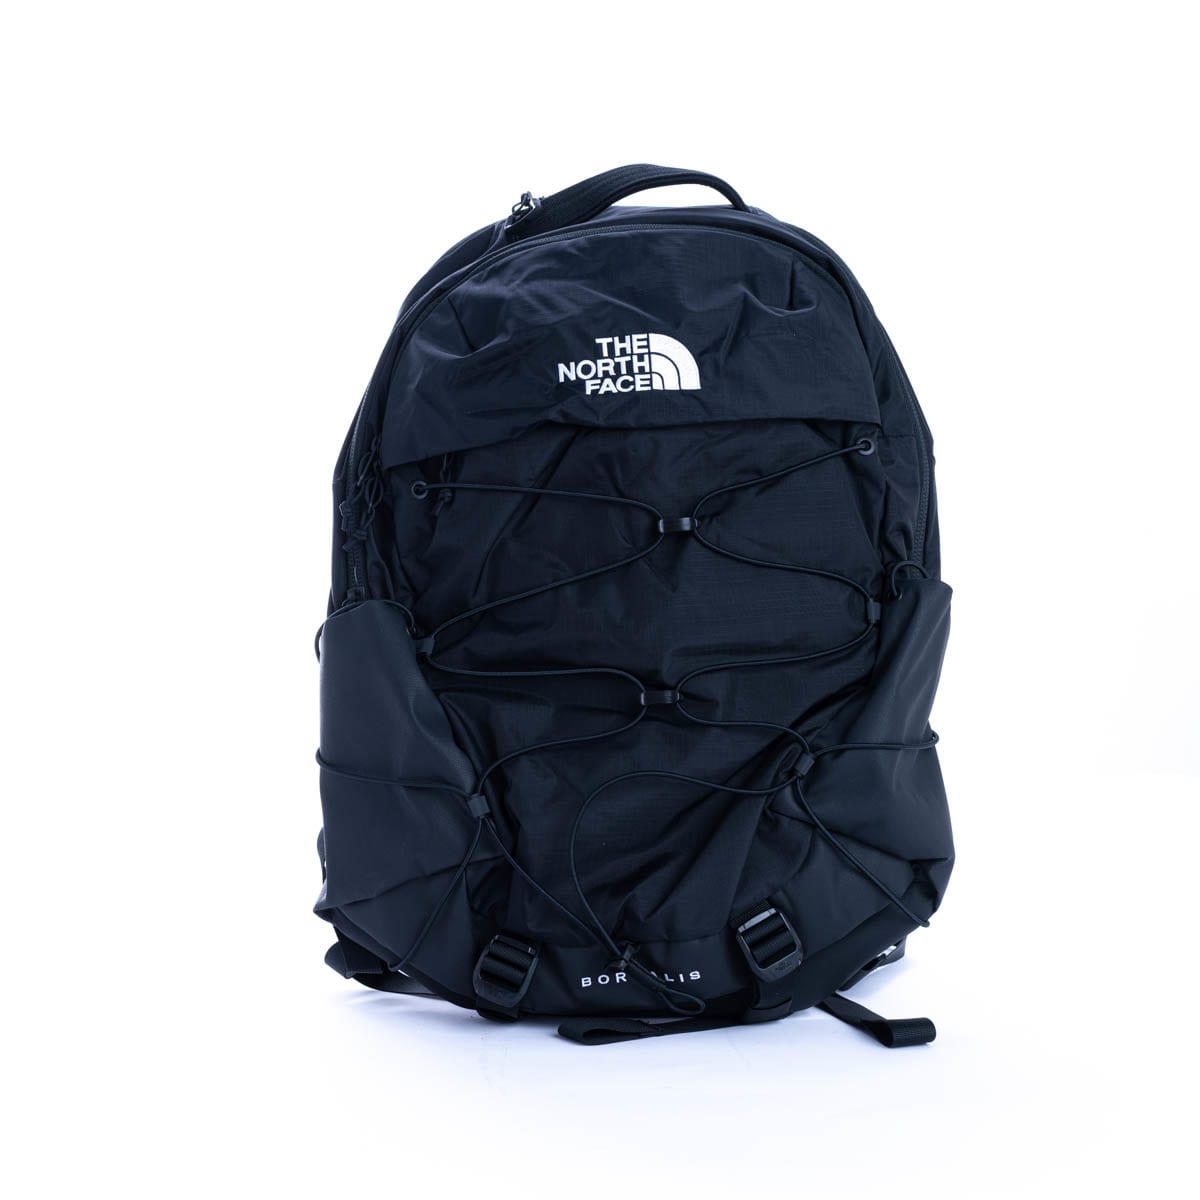 The North Face The North Face borealis Backpack